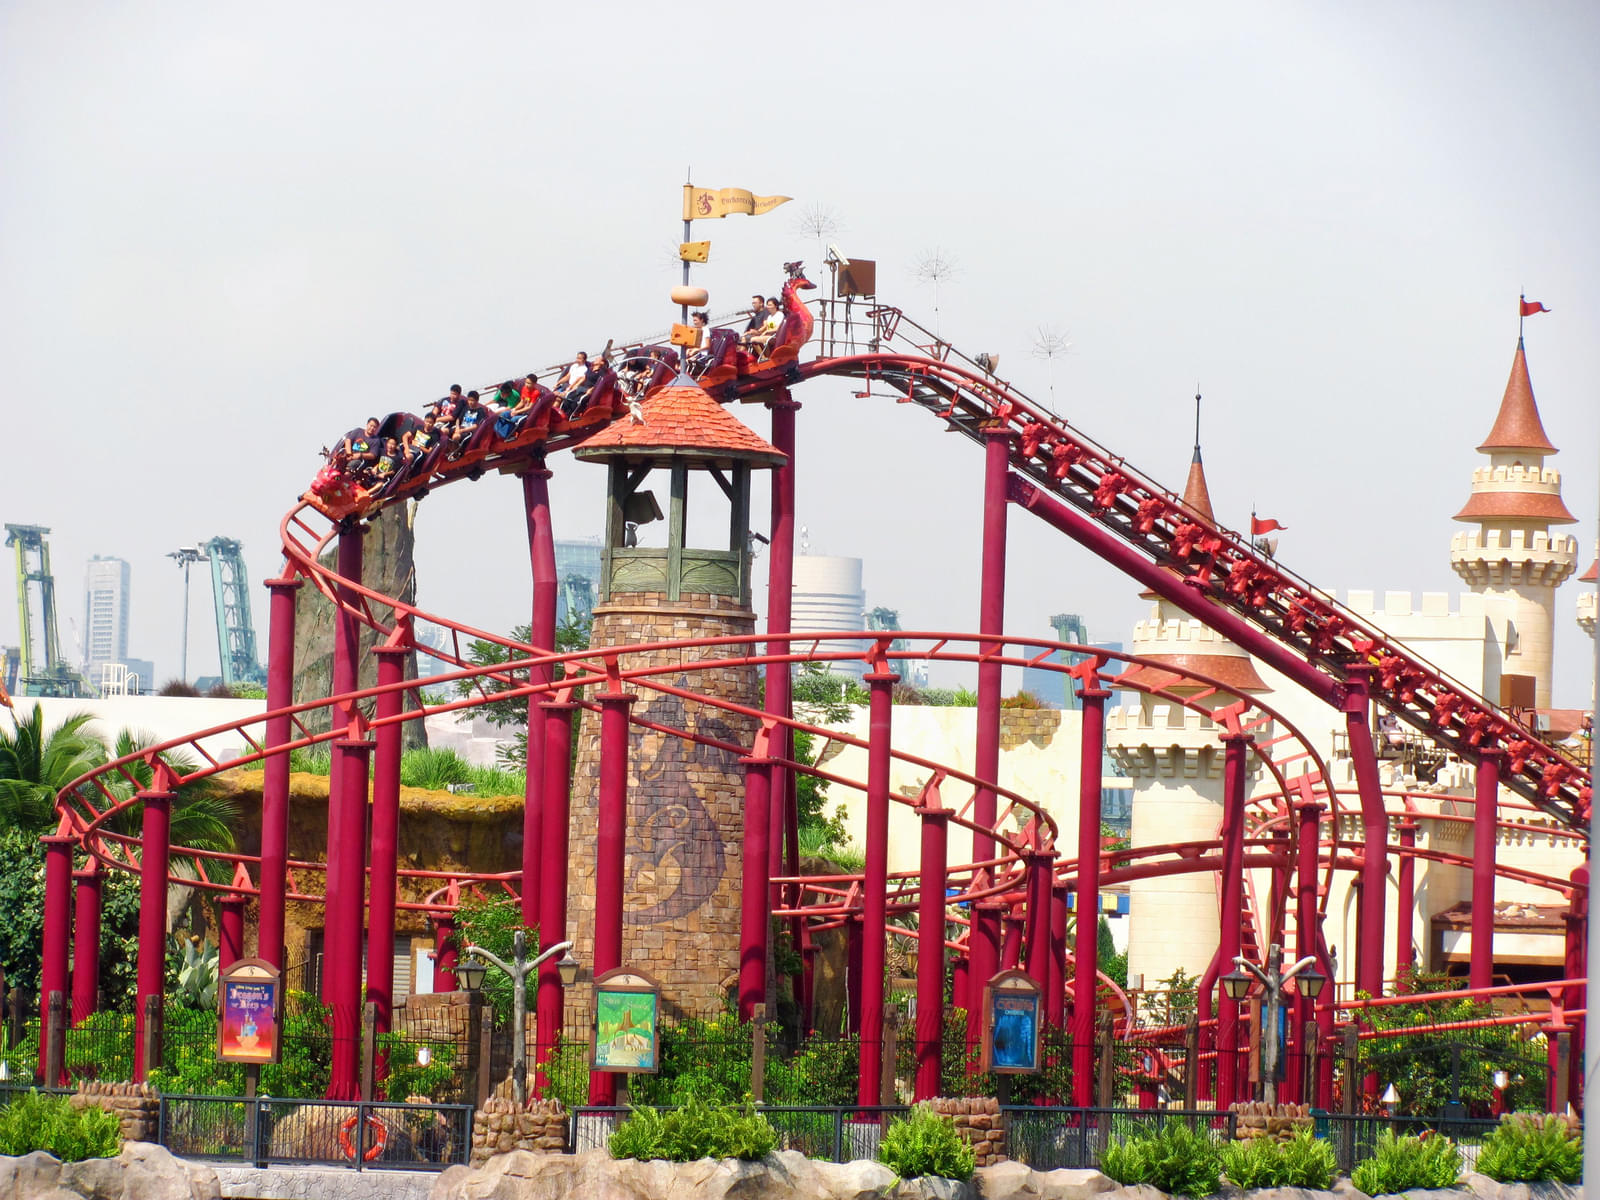 Delight in exhilarating roller coaster thrills for some wild, crazy fun.